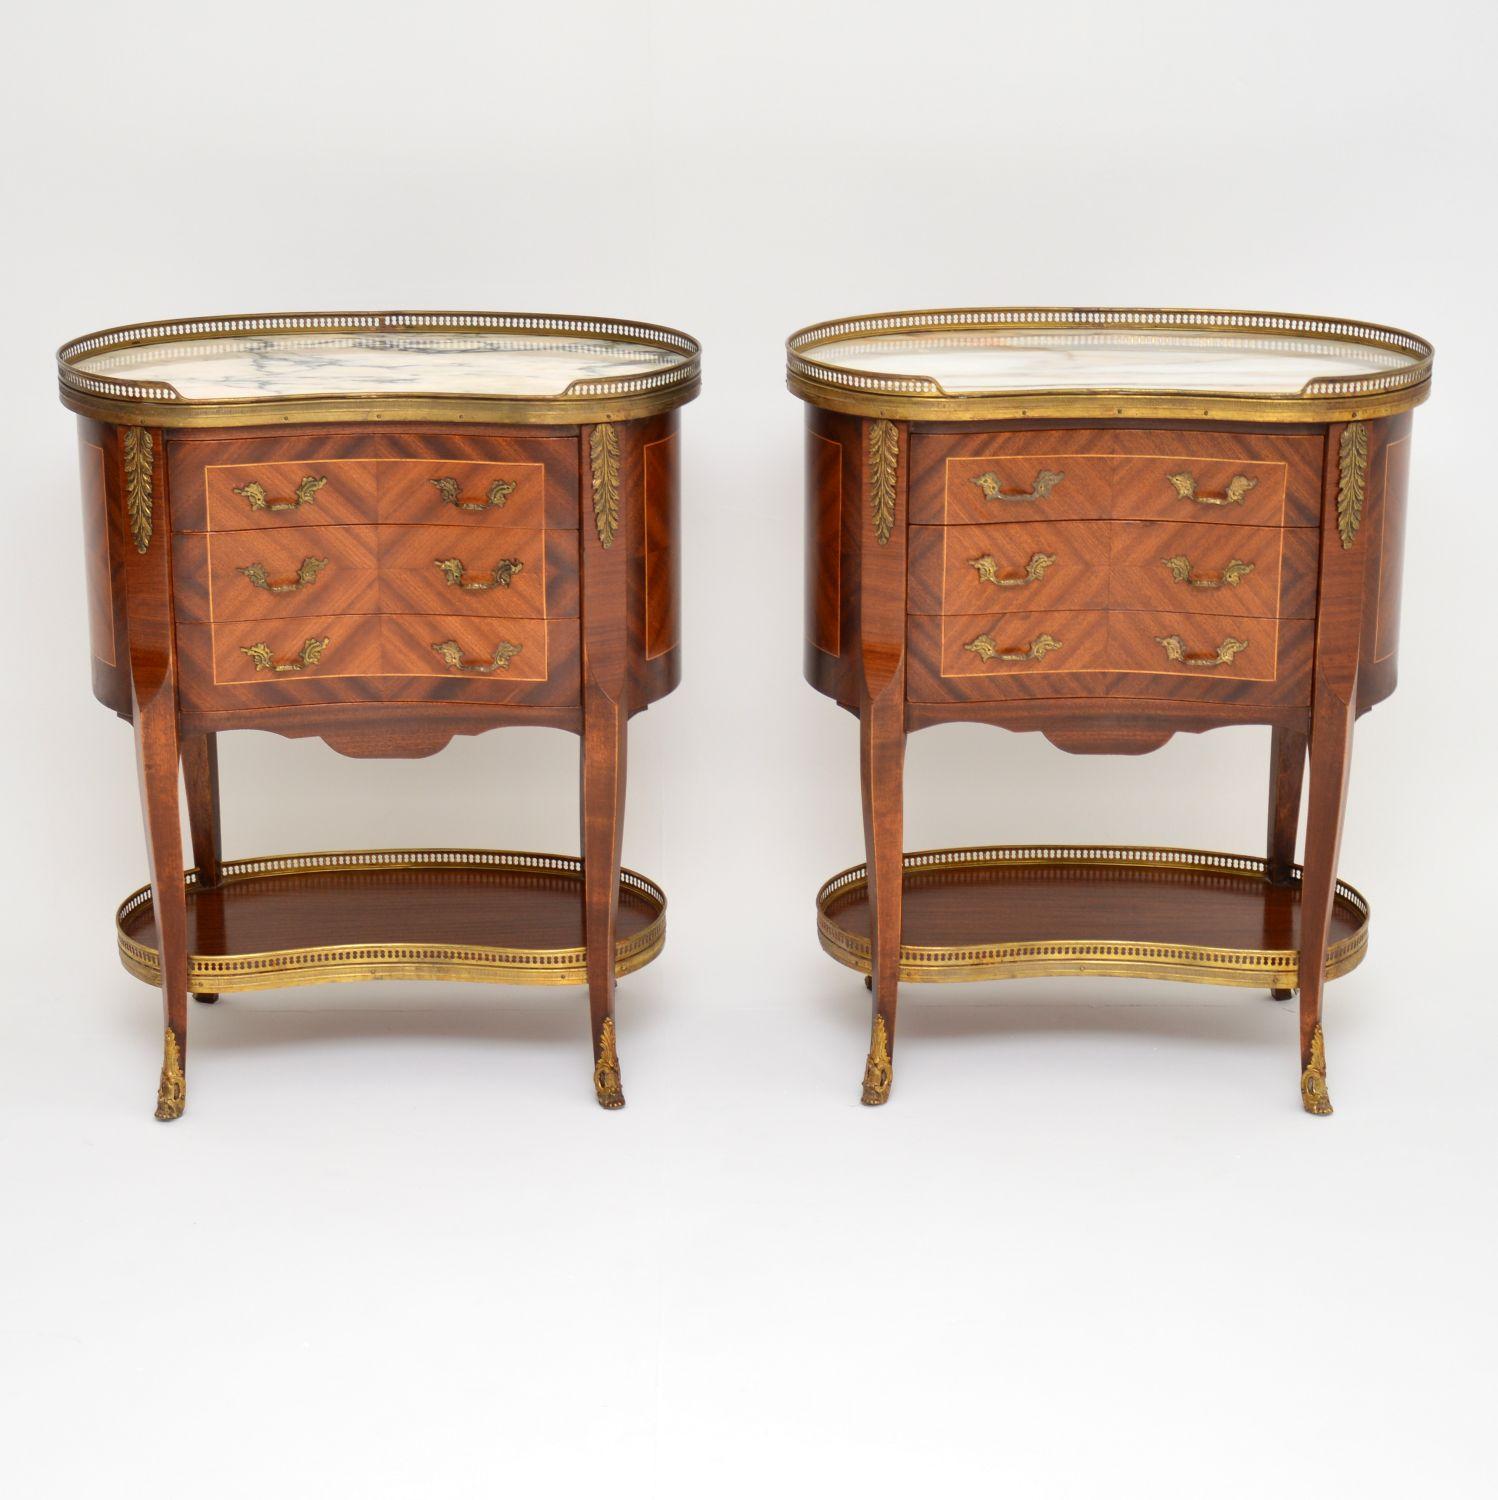 Pair of antique French style marble-top kidney shaped side tables with three drawers in each. They have pierced gilt metal galleries with swags around the marble tops and lower tiers. They also have gilt bronze mounts, feet and handles. The wood is